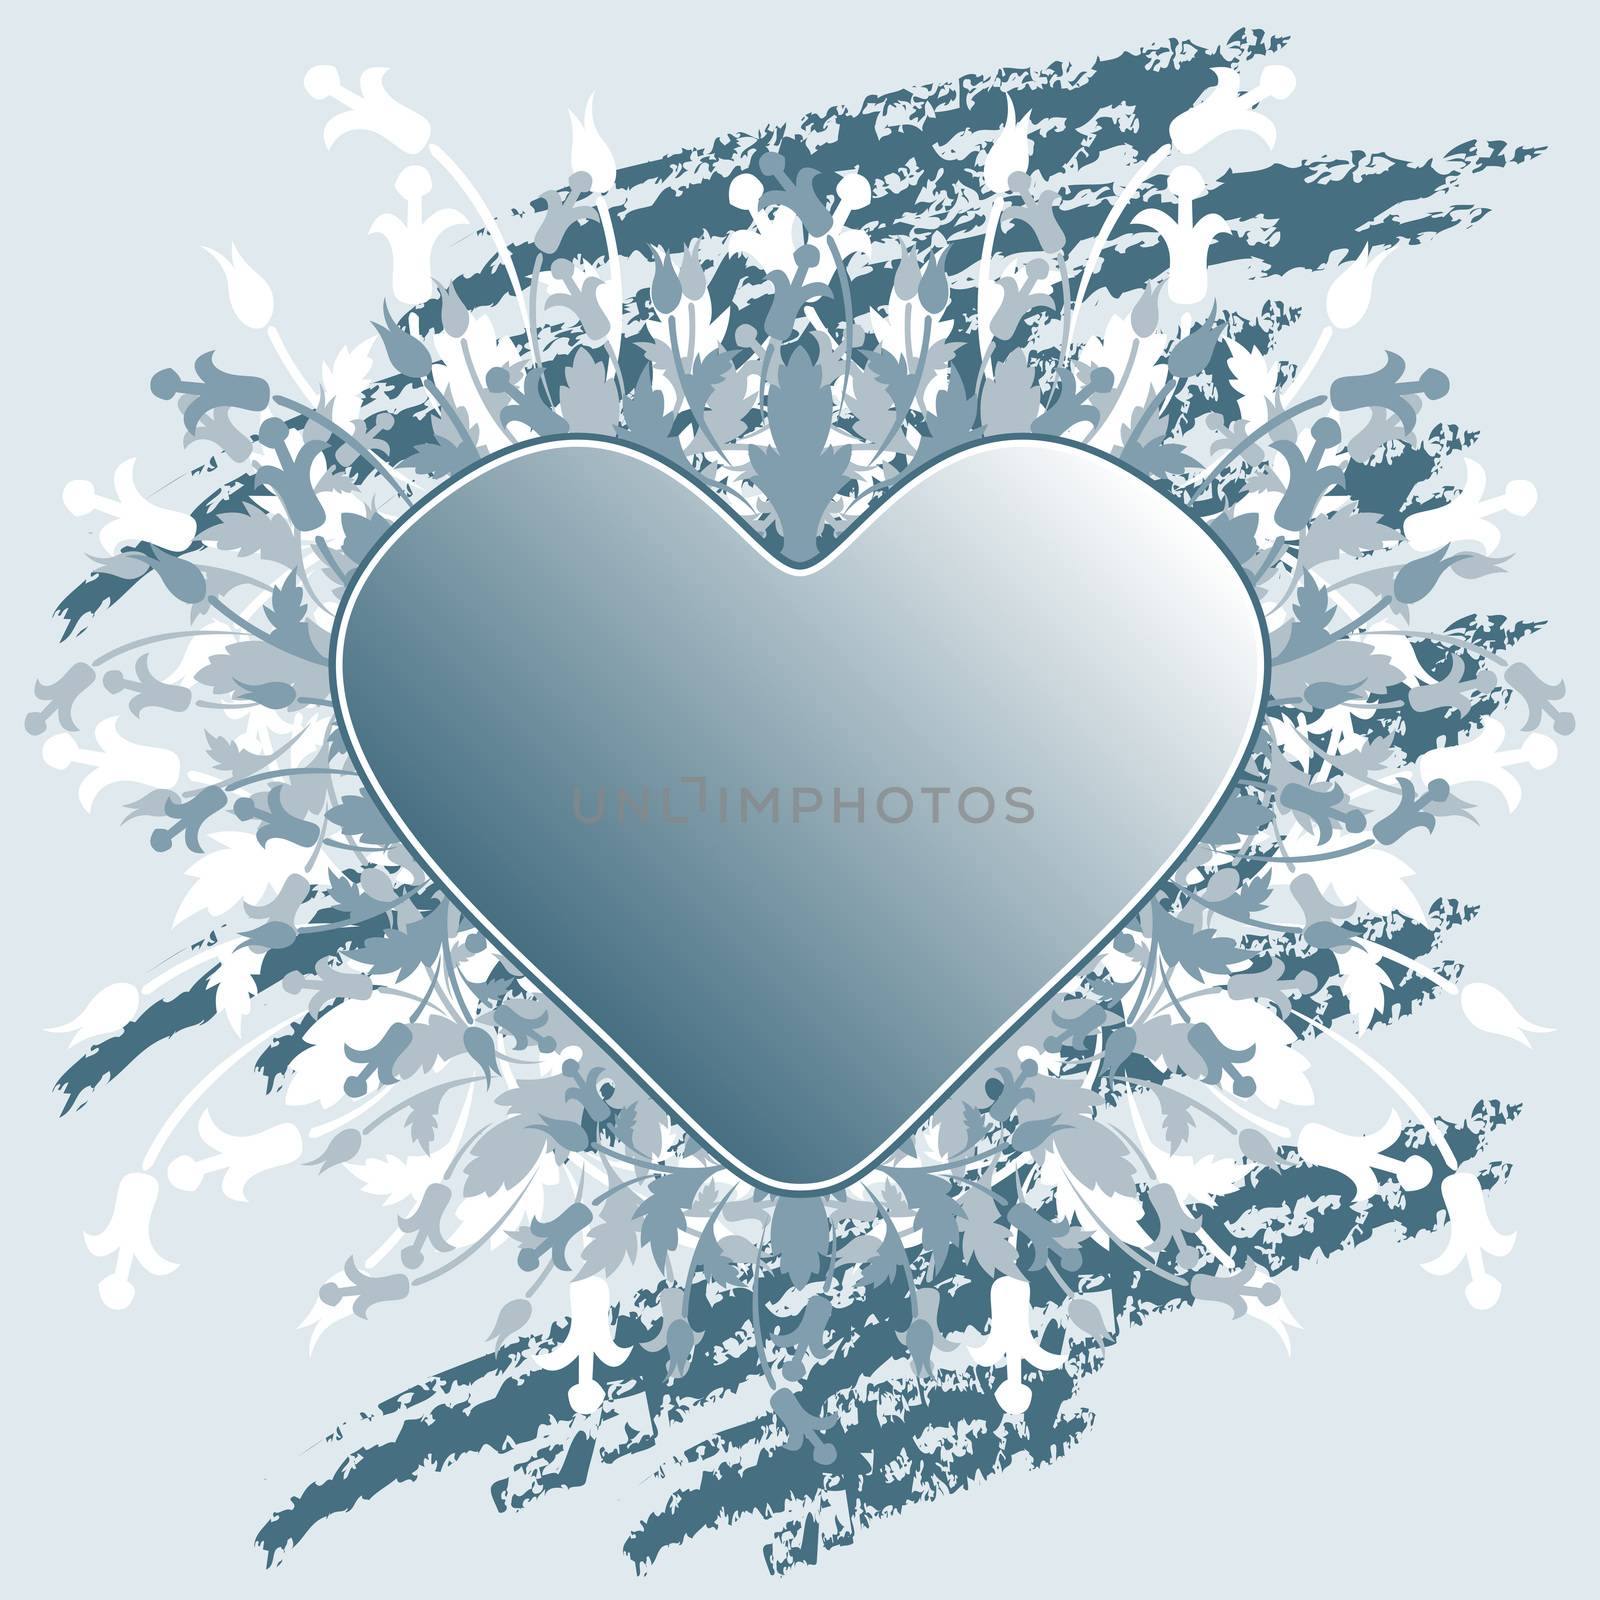 Valentine's Day greeting card with flowers heart on blue grunge background